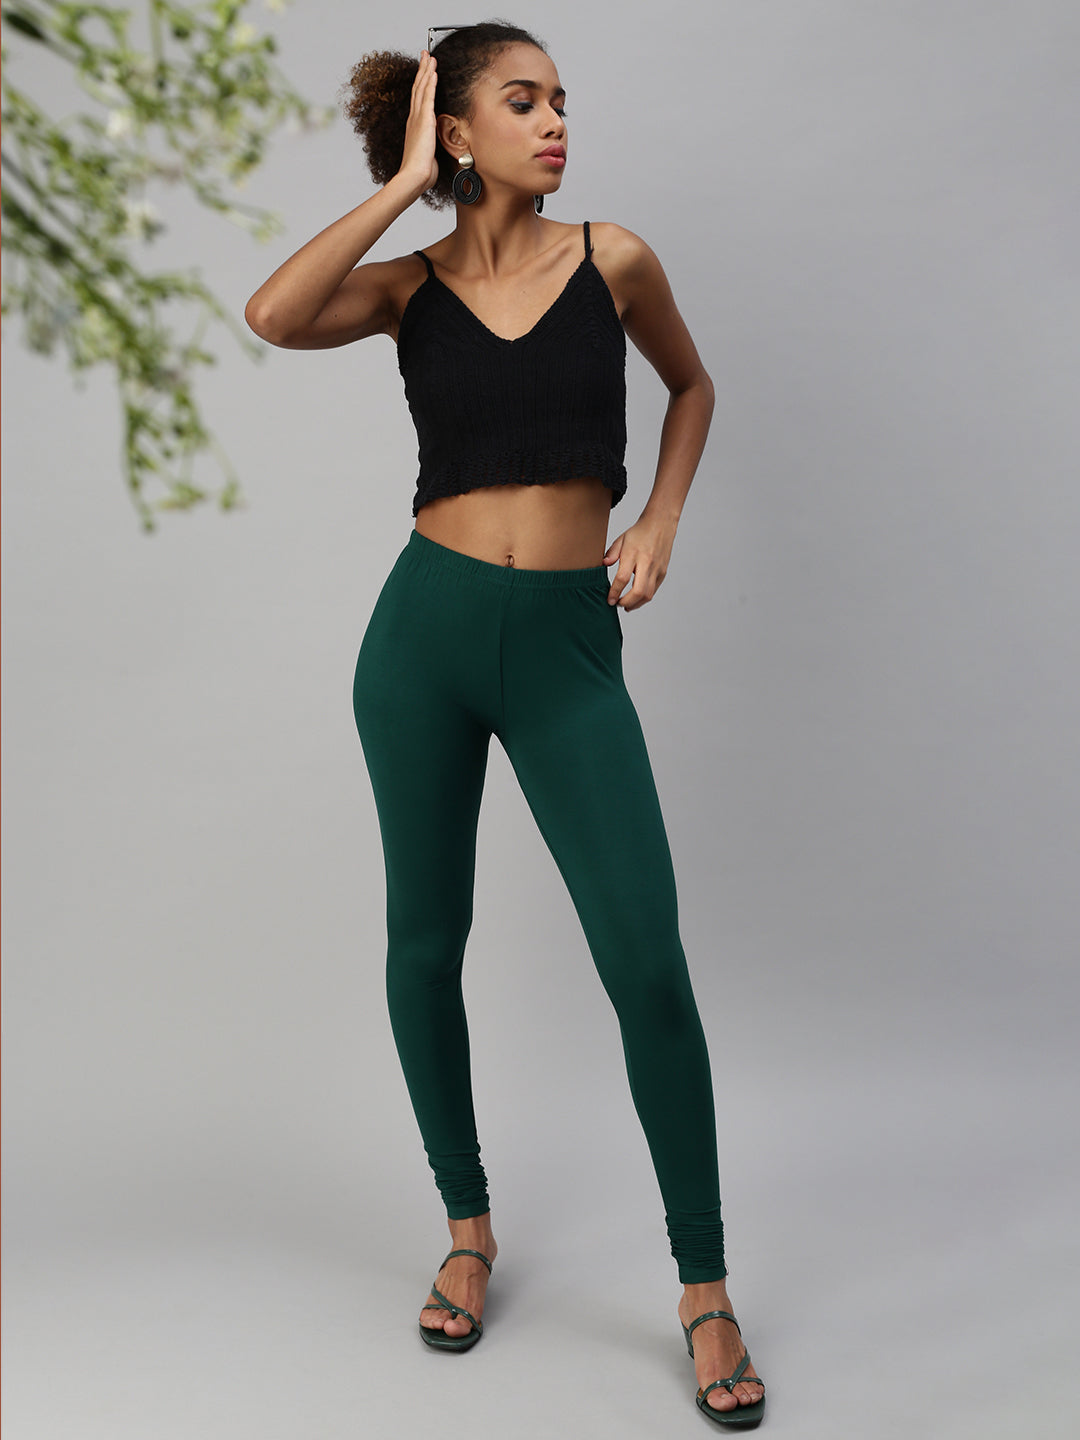 Luxury fashion & independent designers | SSENSE | Green leggings, Outfits  with leggings, Green leggings outfit